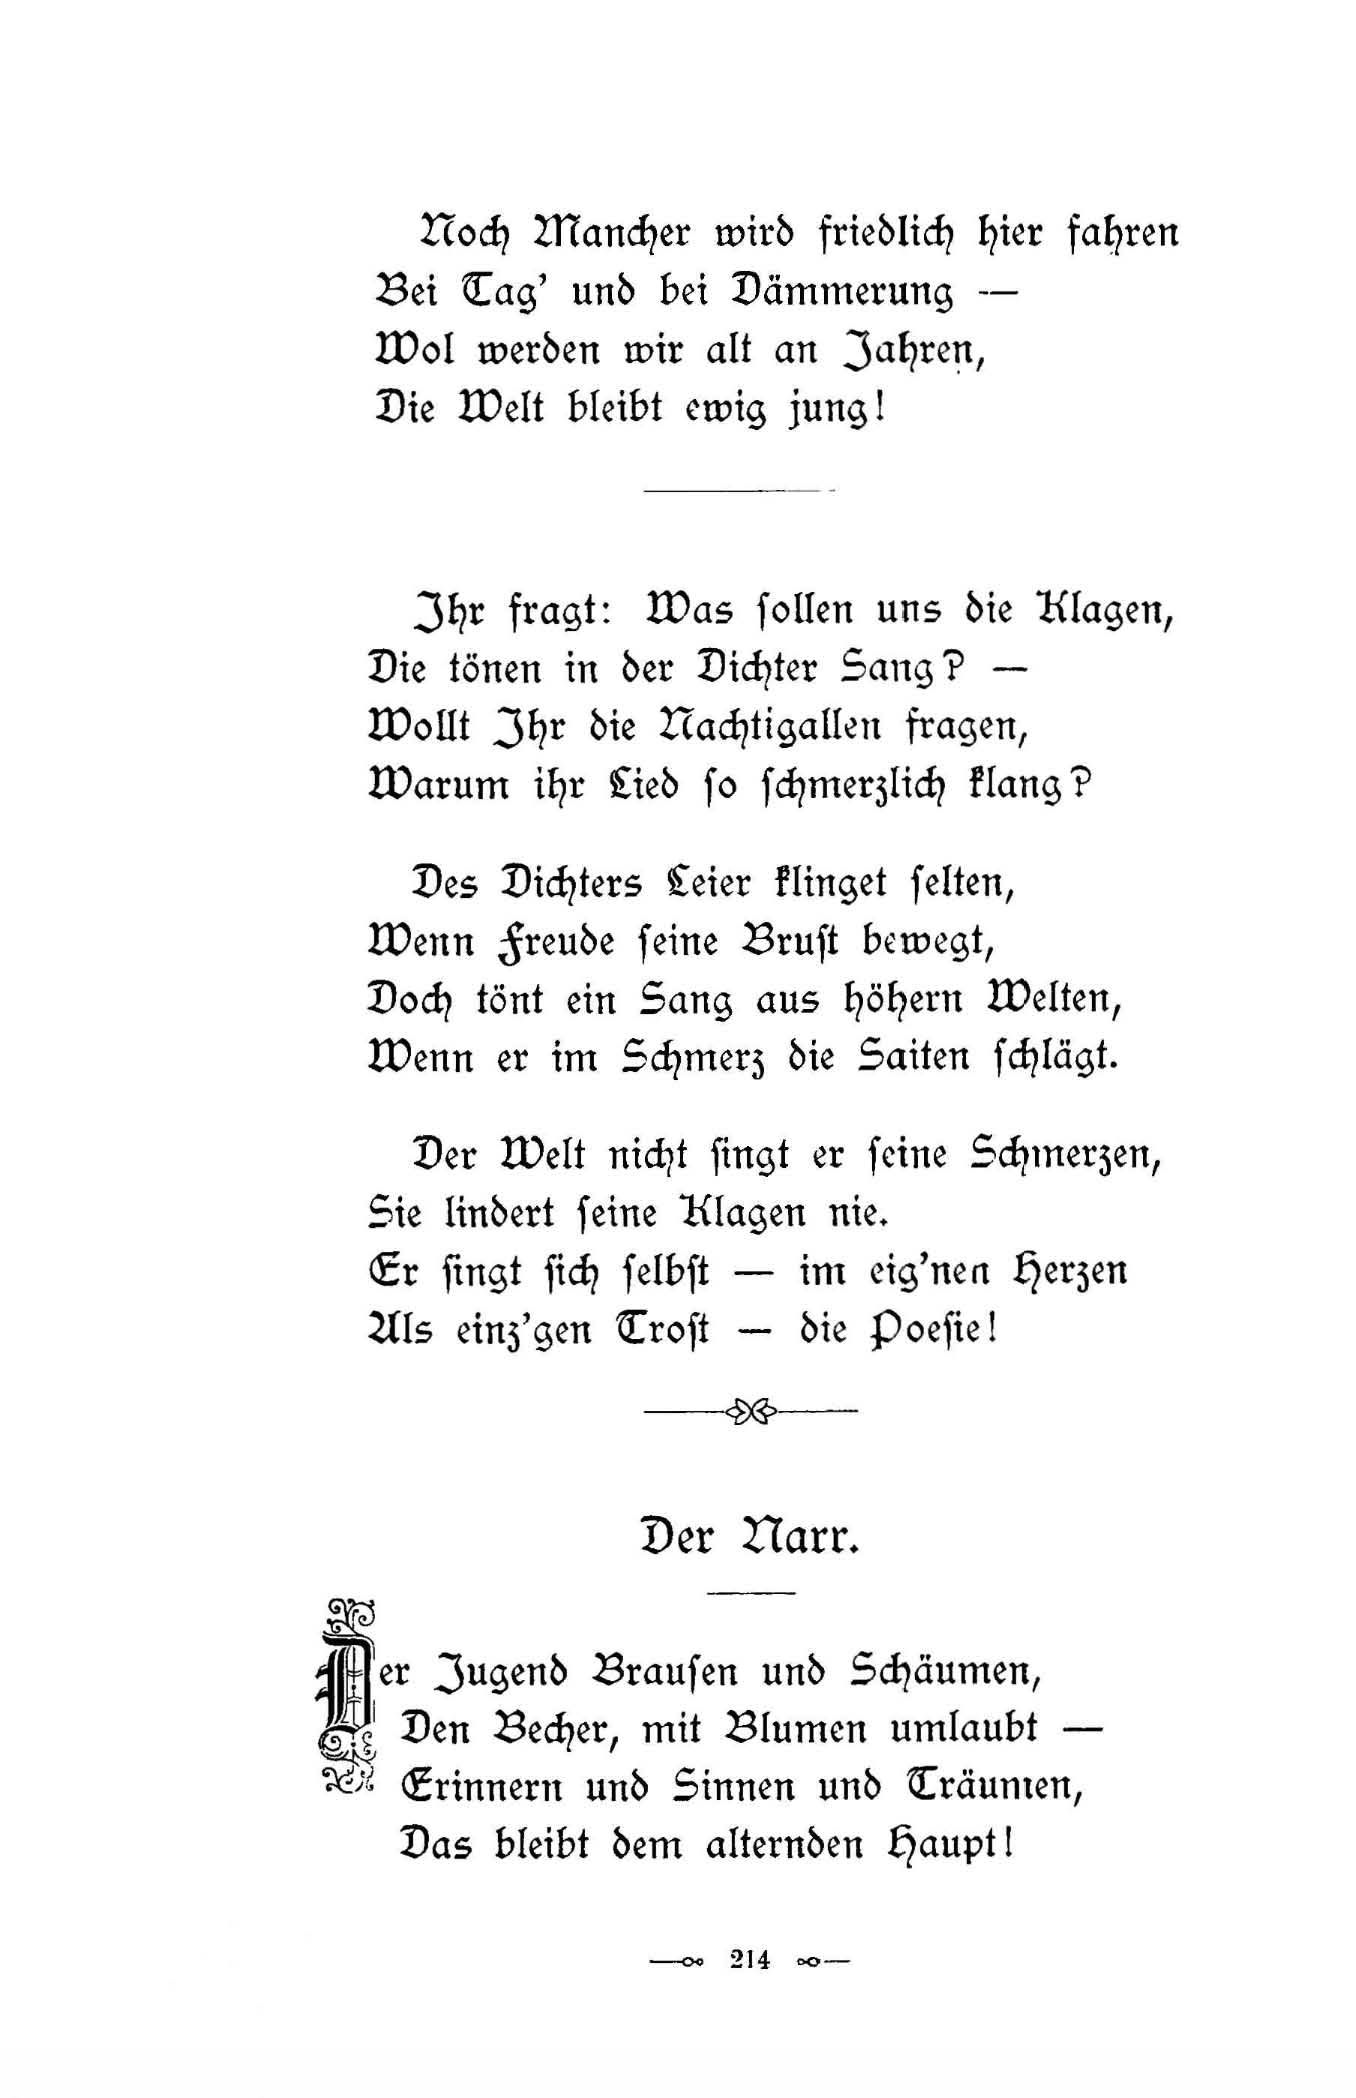 Der Narr (1896) | 1. (214) Main body of text